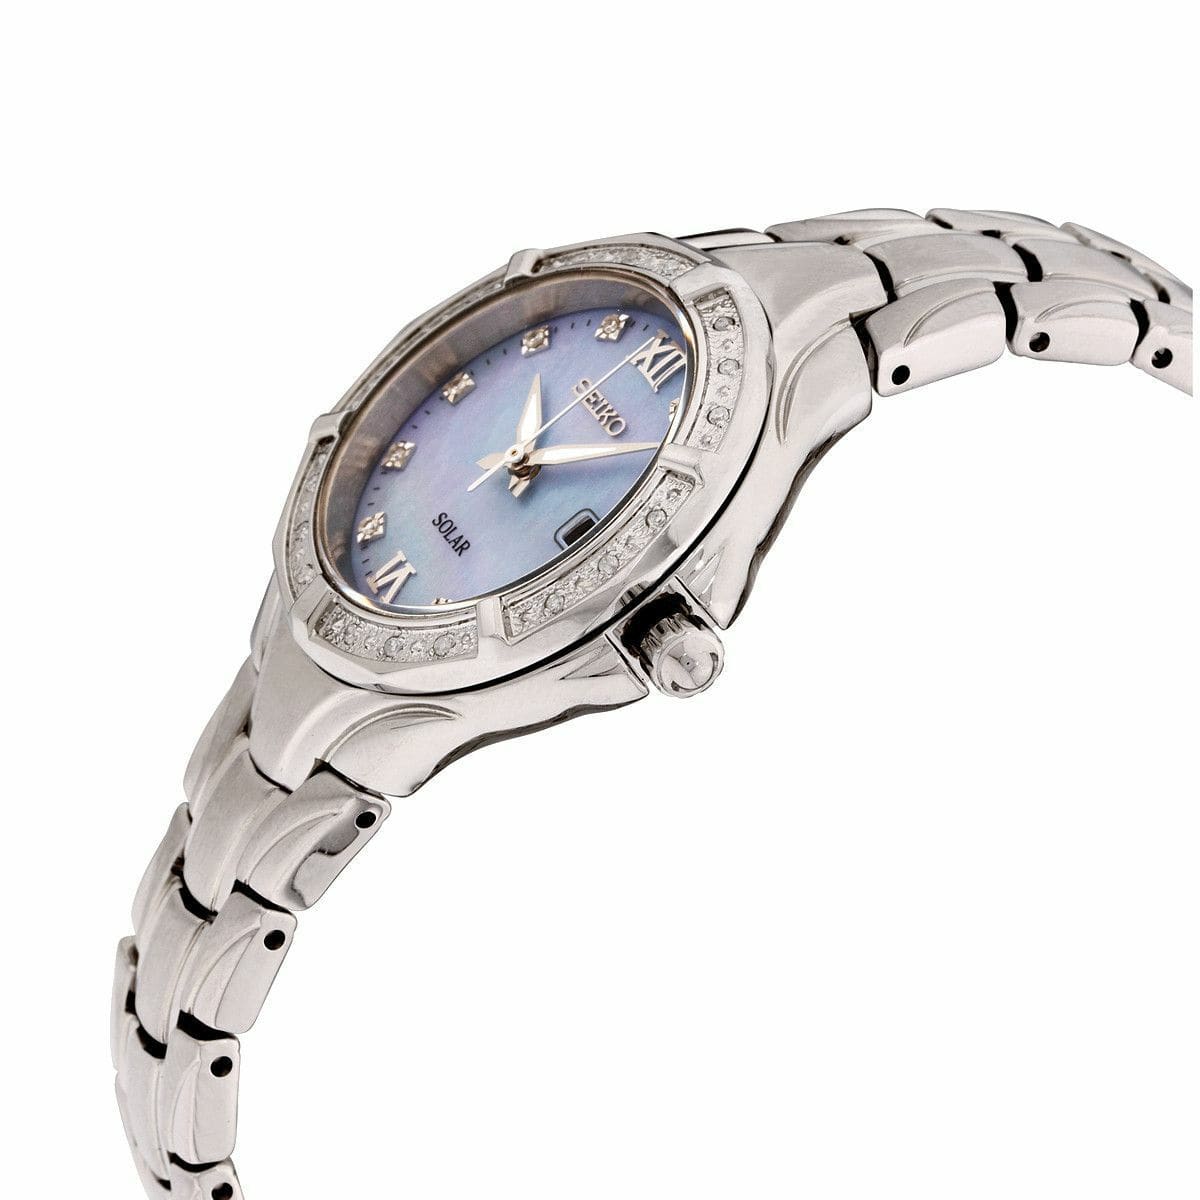 Seiko SUT371 Stainless Steel Diamond Bezel Mother of Pearl Dial Eco-Drive Watch 029665193780